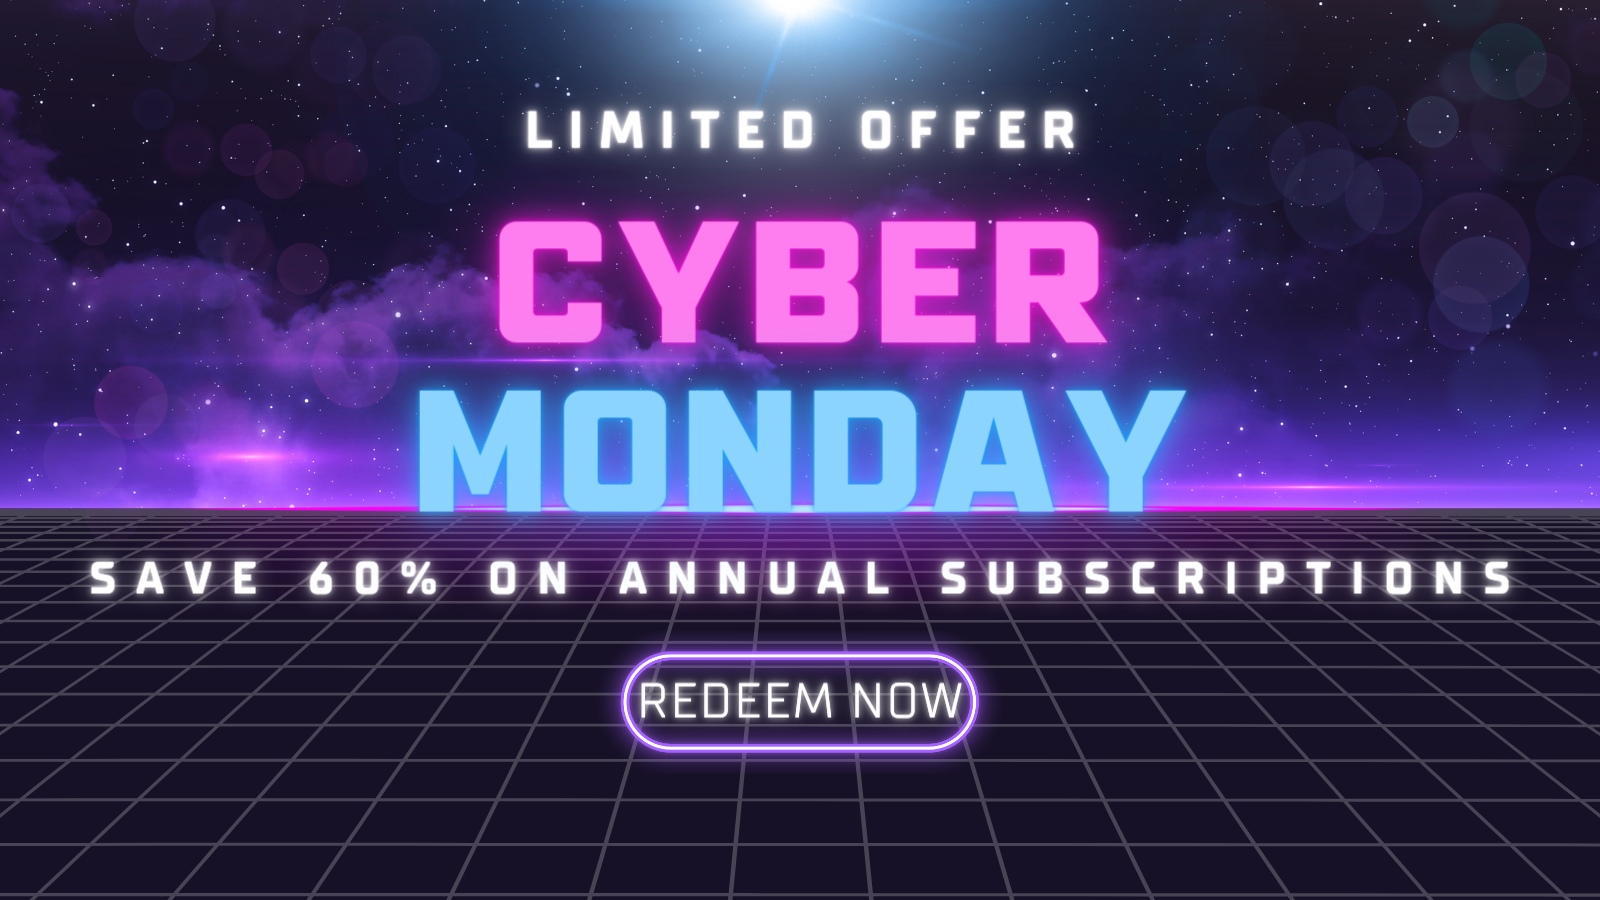 Cyber Monday Sale - 60% Off